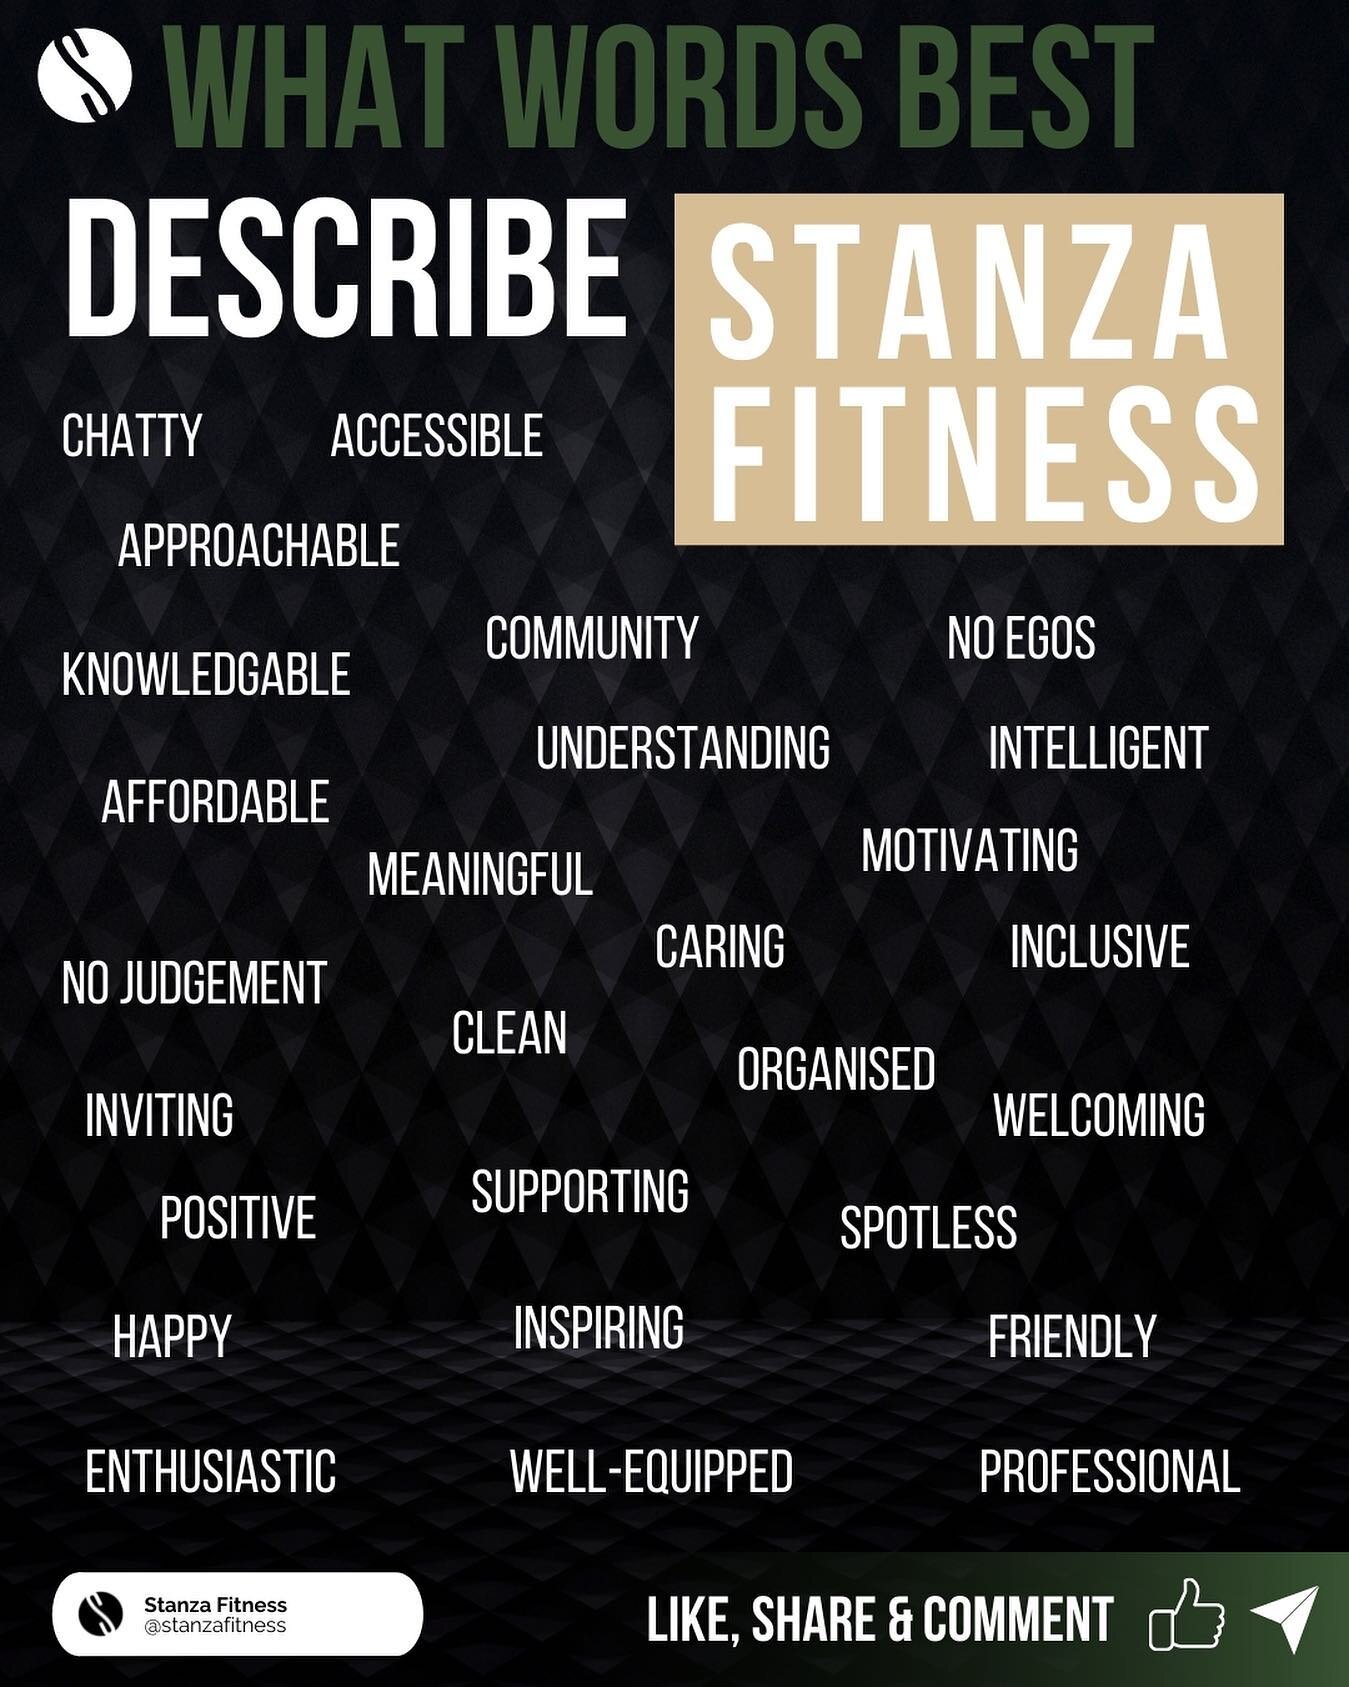 We asked, you answered...
-
Got any more to add? Comment, as we&rsquo;d love to hear!
-
This is what you can consistently expect when you are a client, a member or a visitor of Stanza Fitness.
-
#EveryoneGetsCoached
-
#TeamStanzaFitness